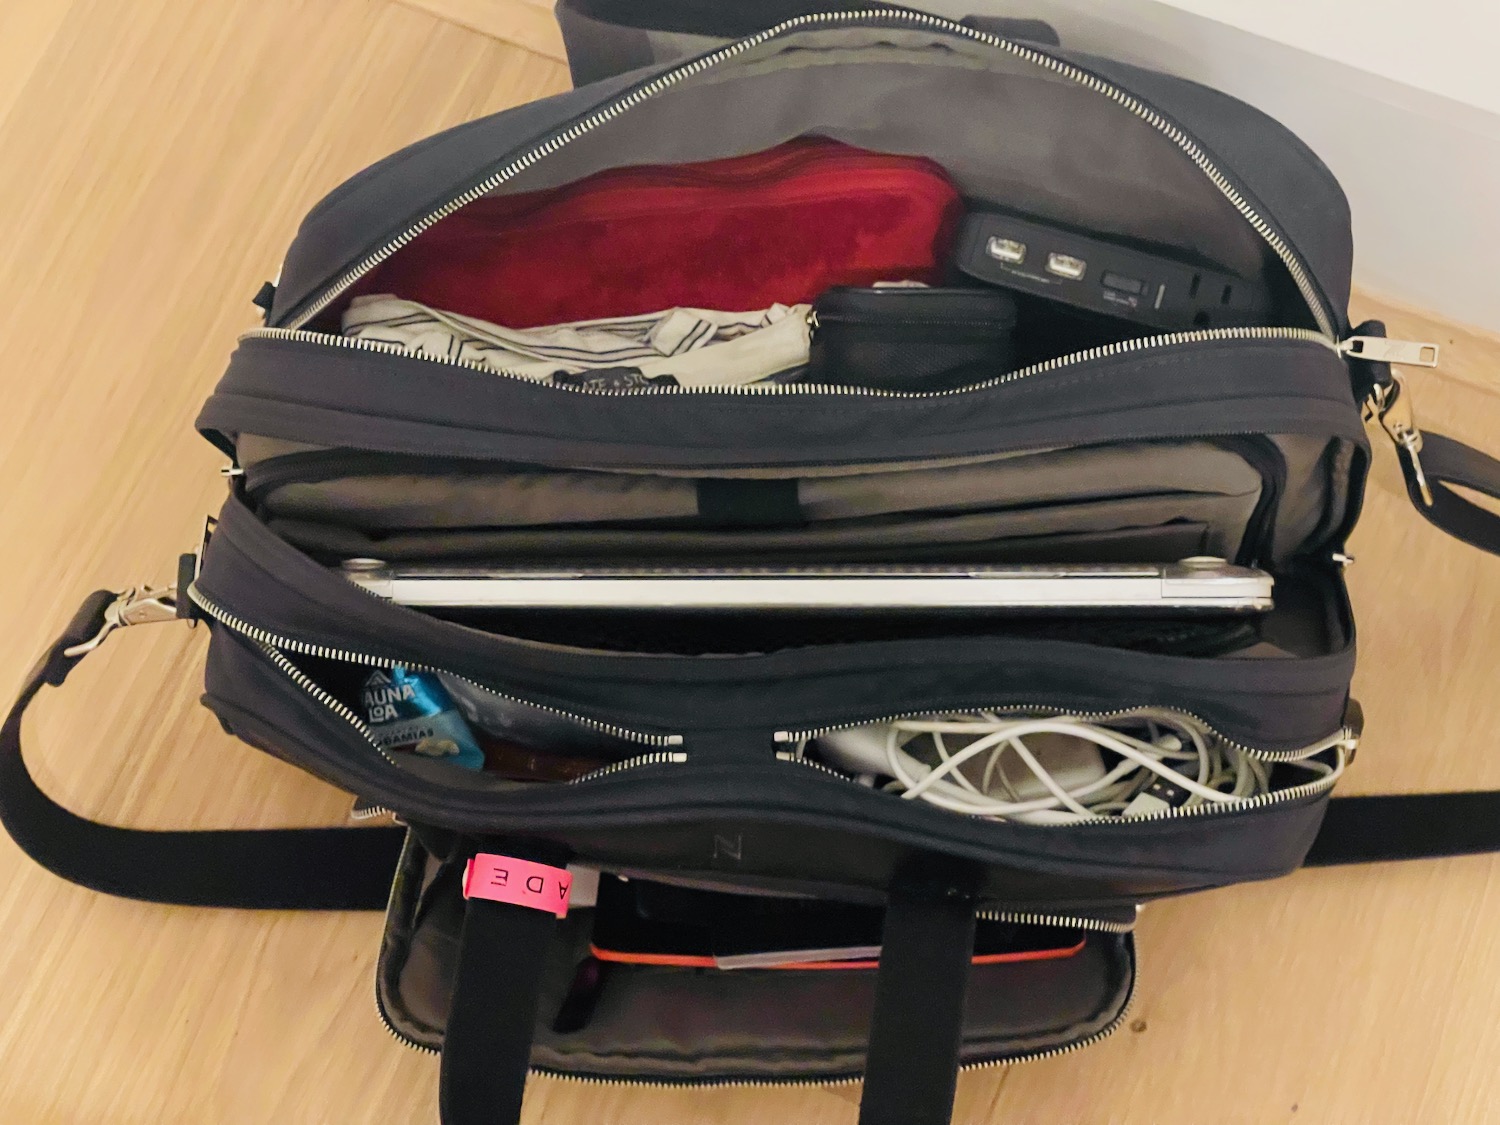 a bag with electronics in it